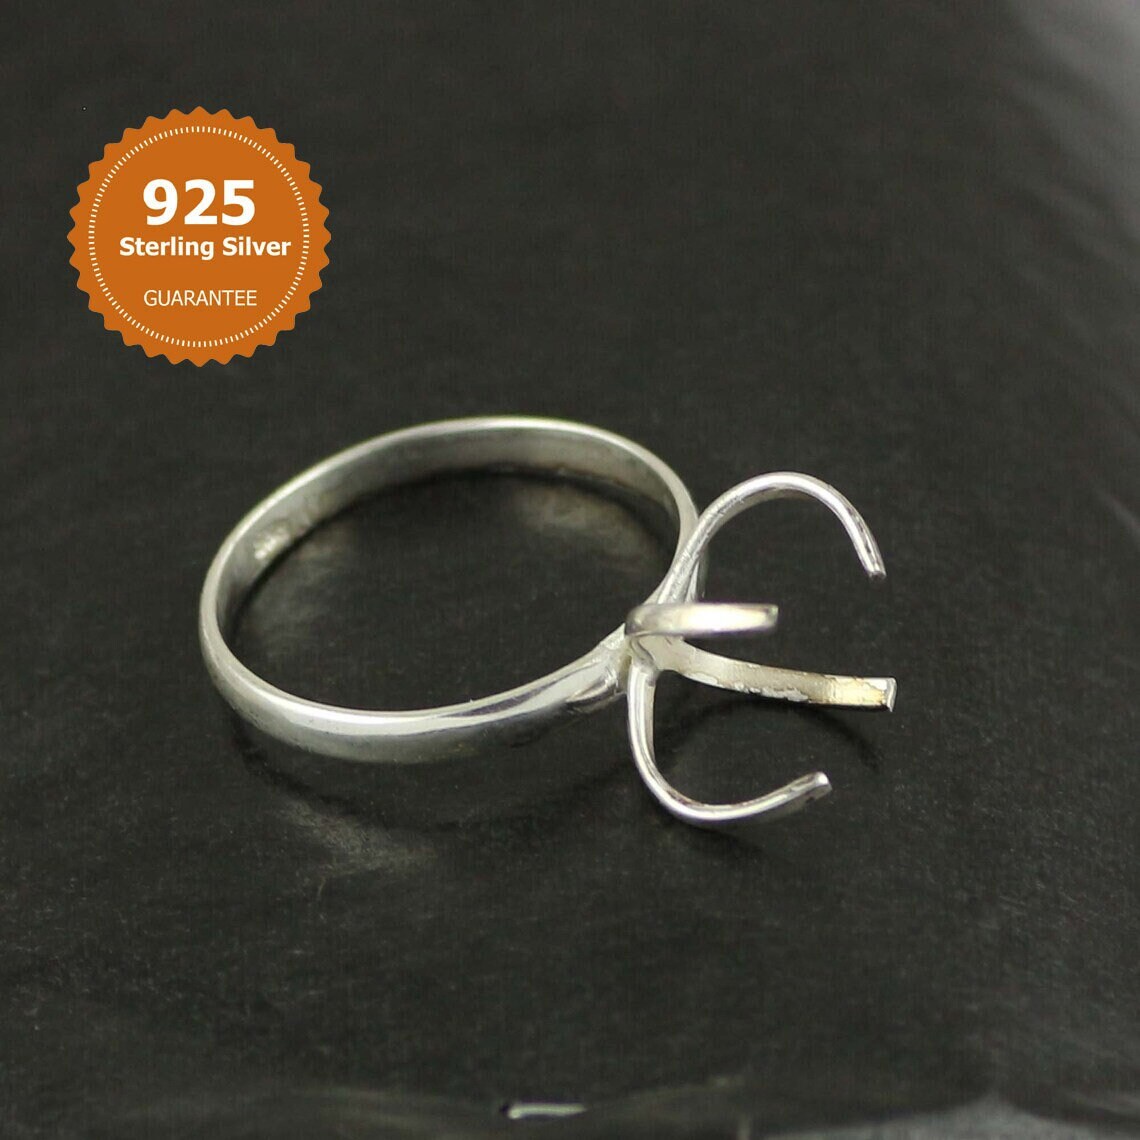 925 Sterling Silver 4 Claws Ring Blanks Adjustable Ring Base for 12mm  Irregular Gemstones Cabochon Setting Ring Jewelry Making